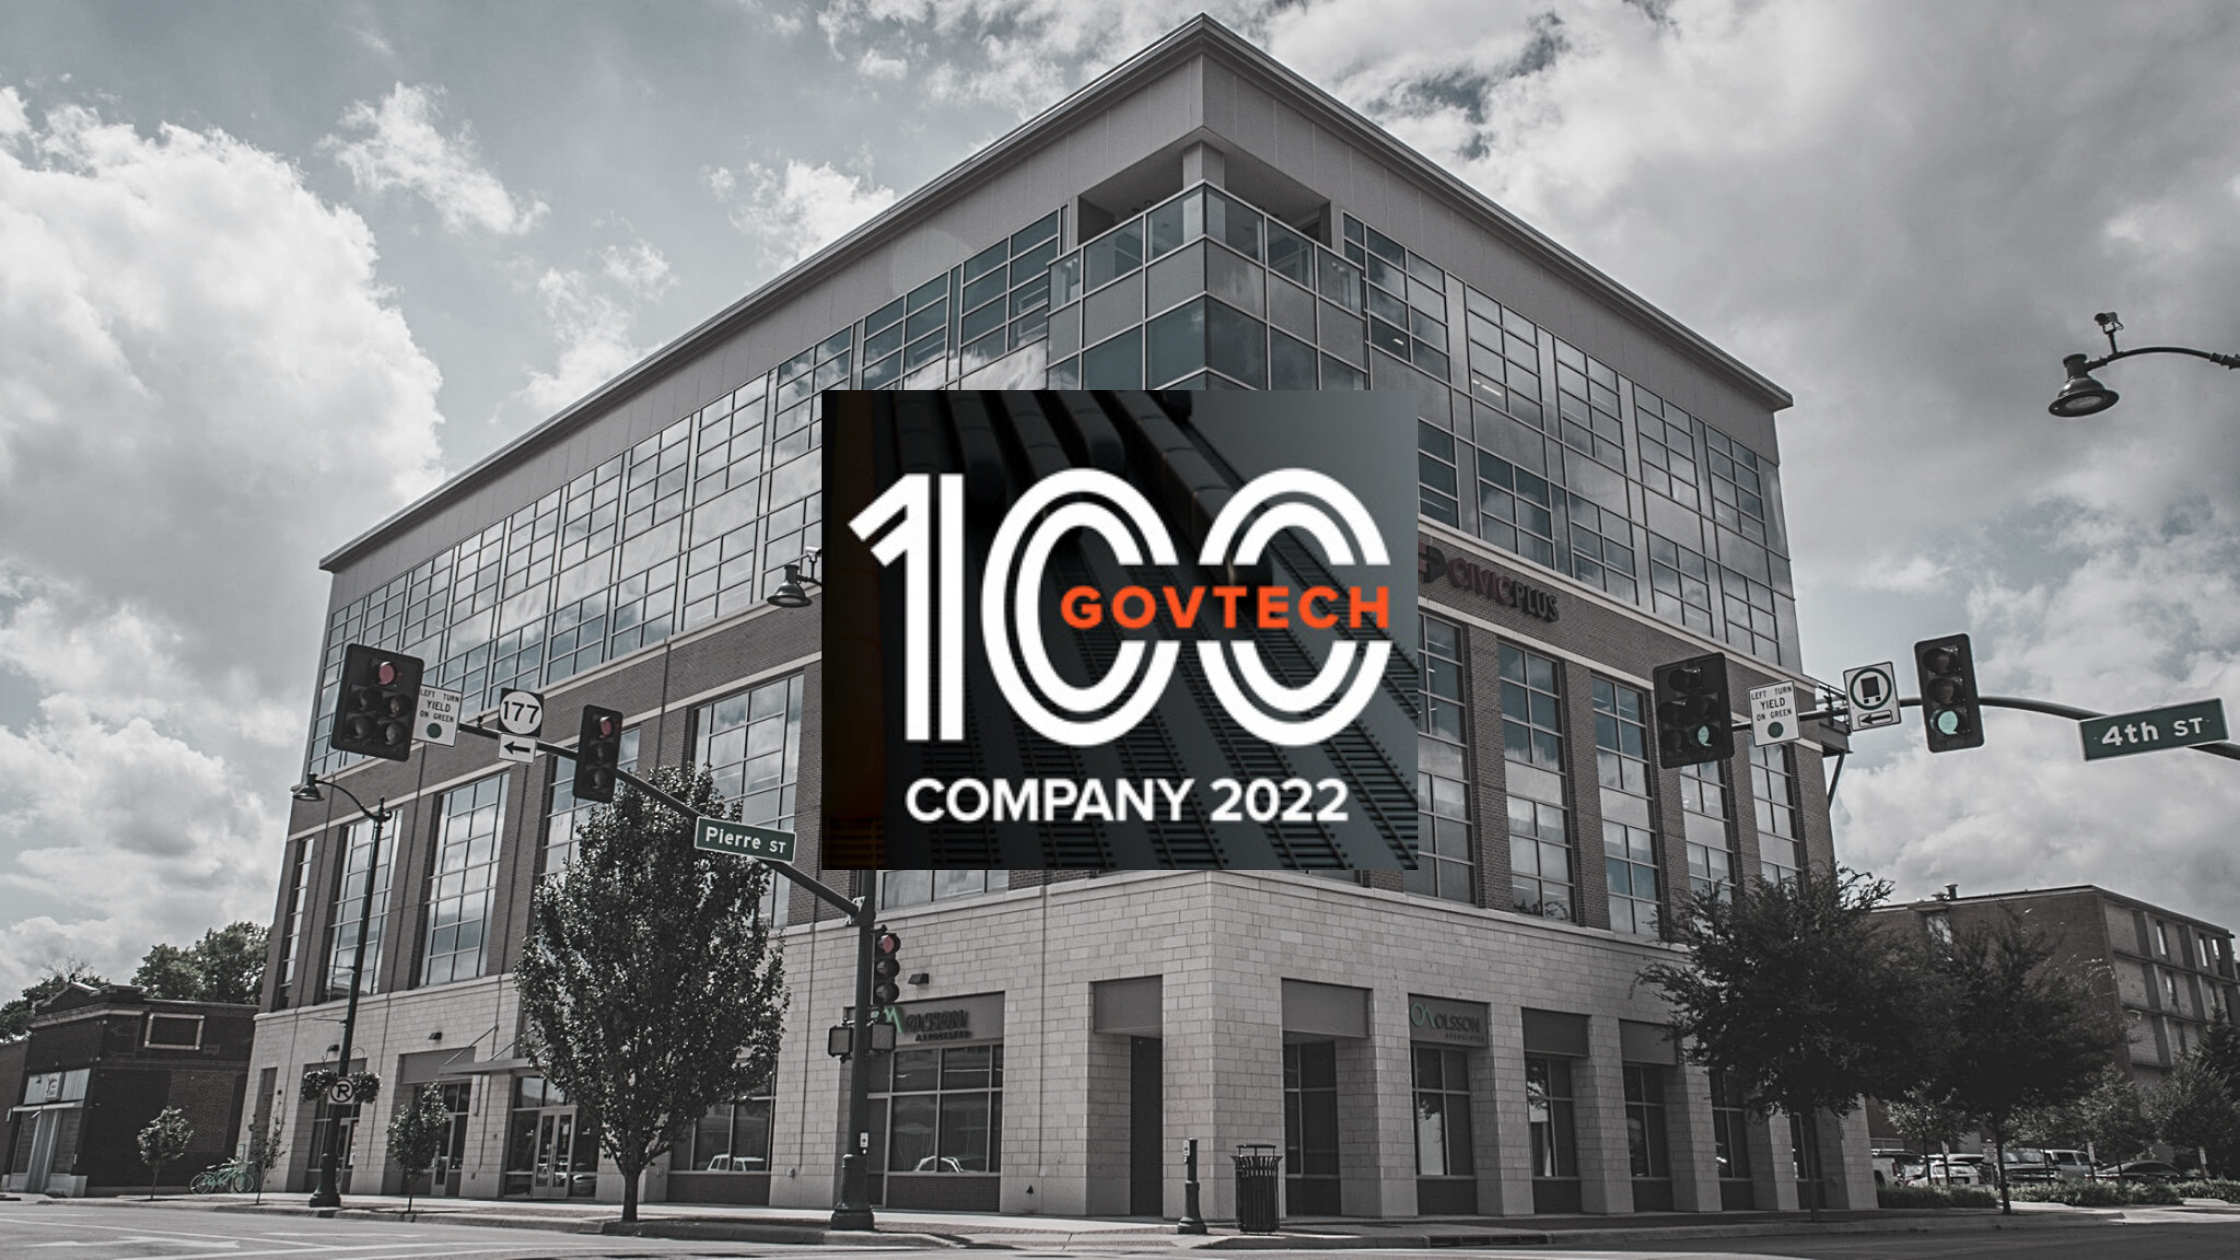 [Updated] CivicPlus Recognized as GovTech 100 Company for 2022